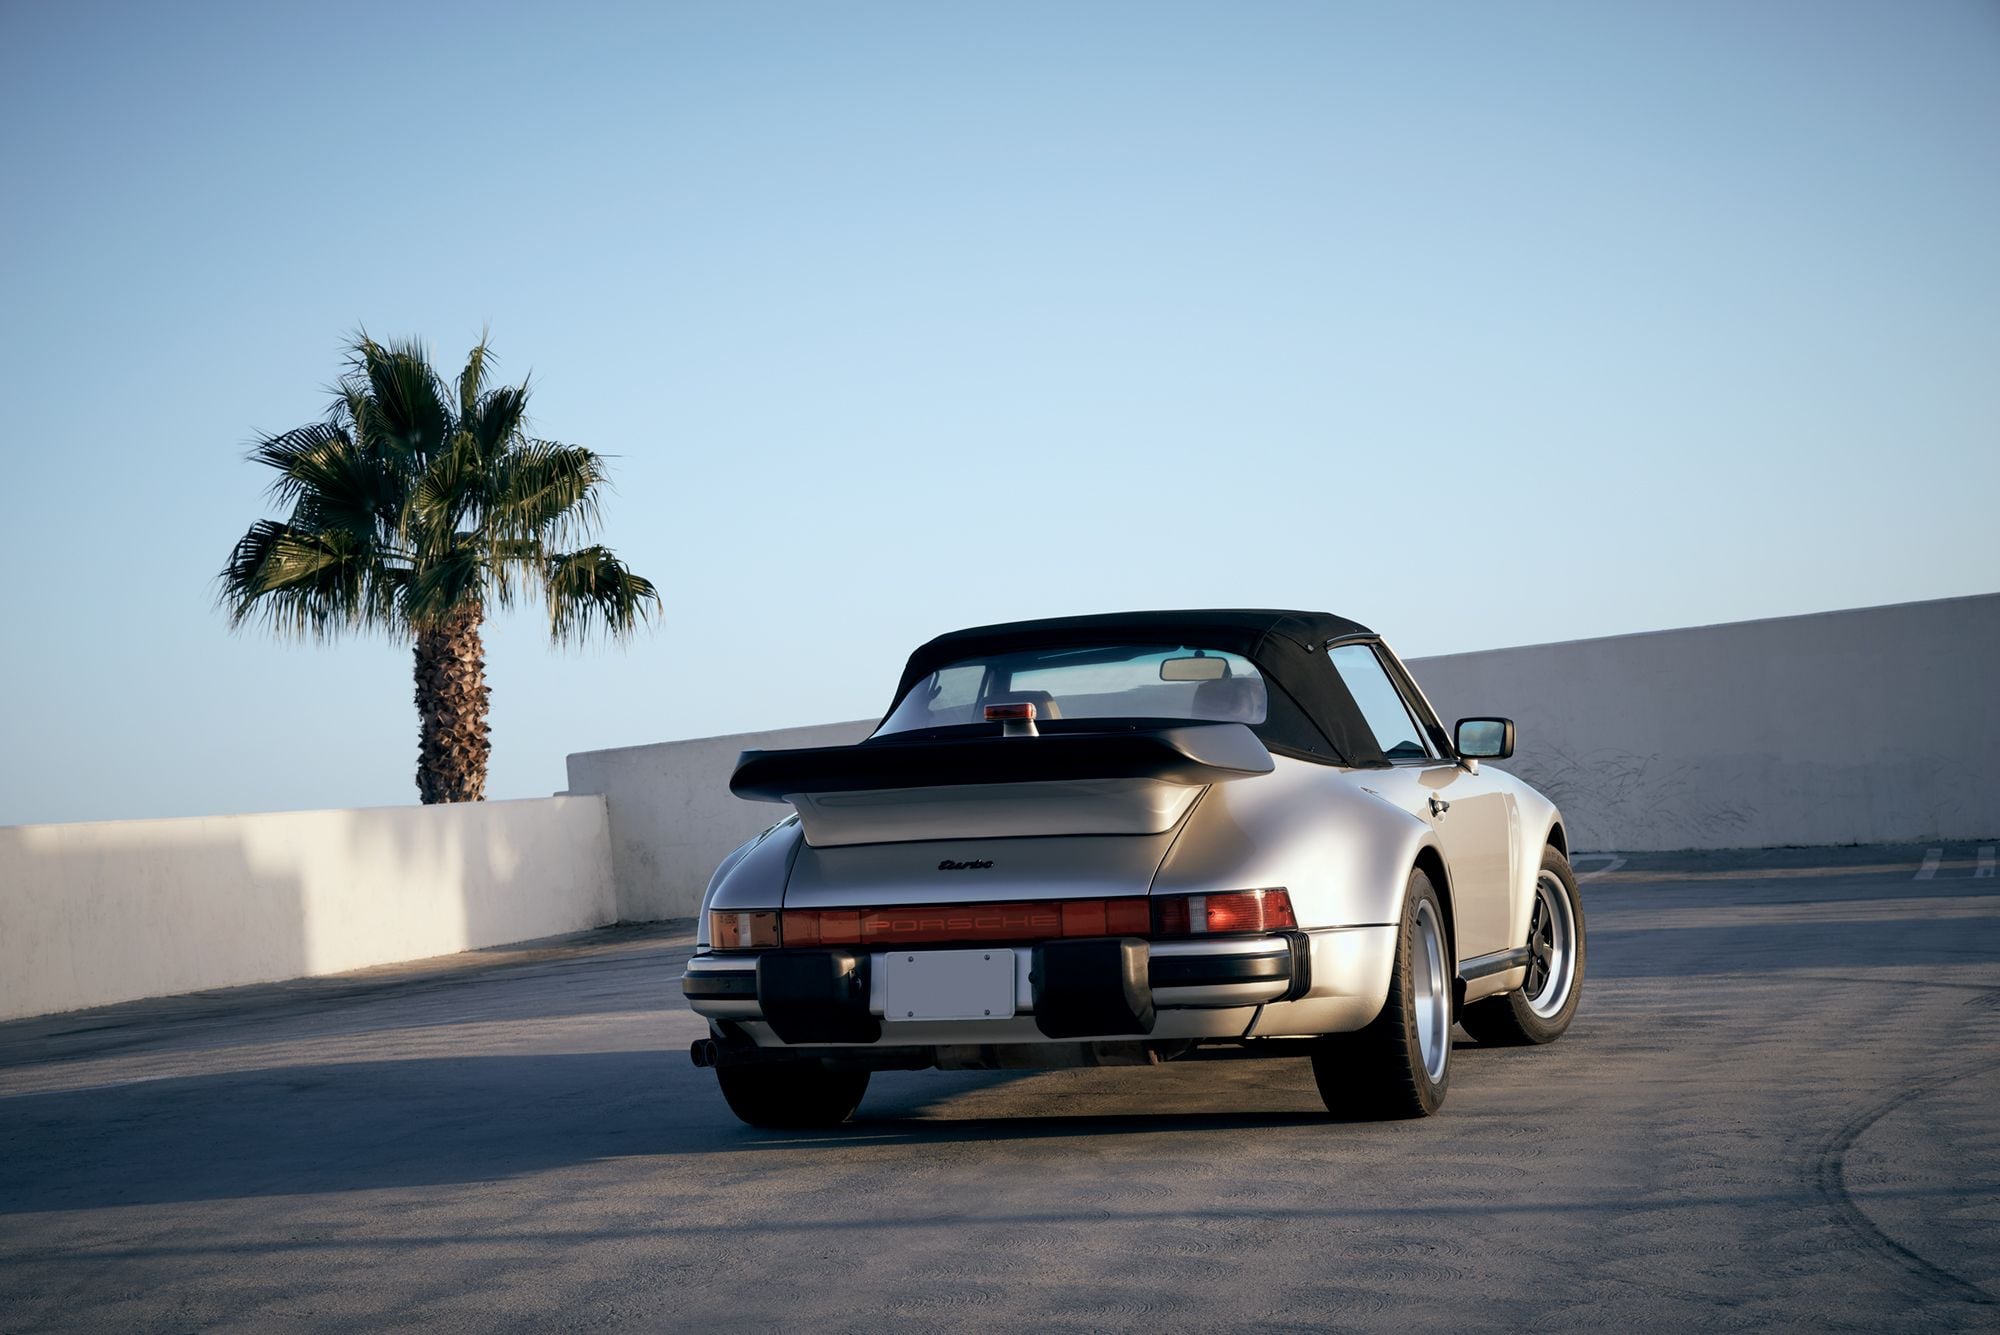 1989 Porsche 911 - Once in a Lifetime Opportunity - Used - VIN WP0EB0935KS070551 - 13,500 Miles - 6 cyl - 2WD - Manual - Convertible - Other - Ventura, CA 93003, United States